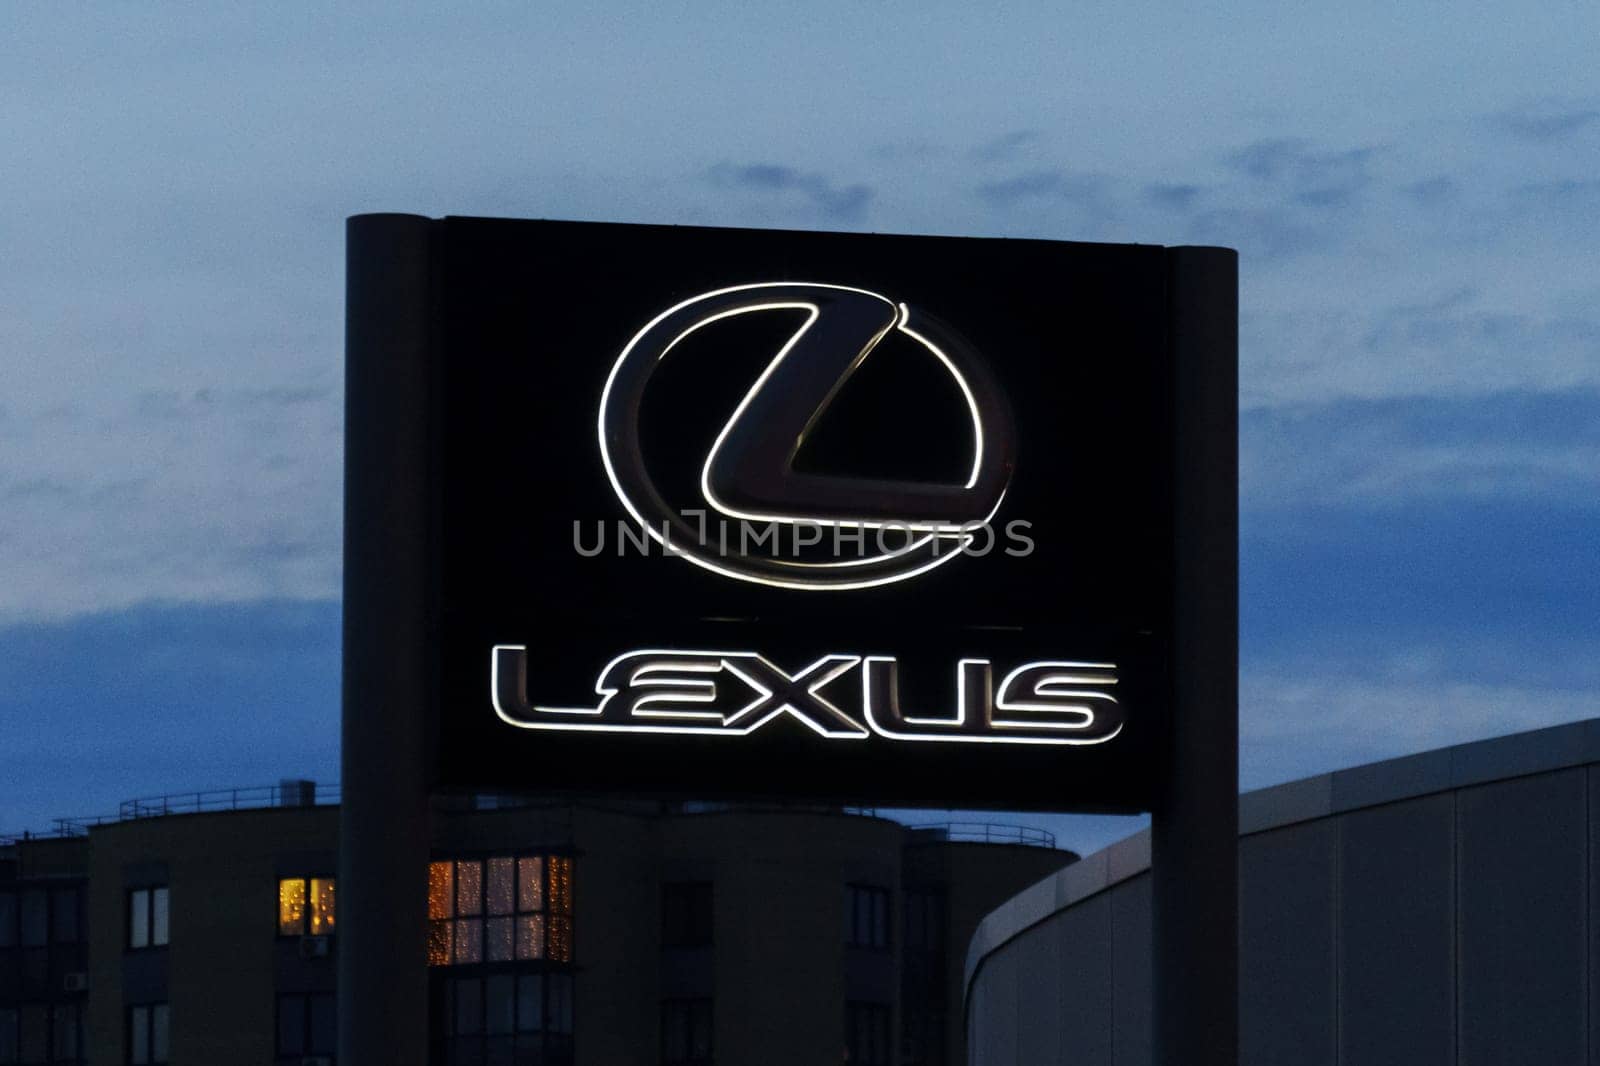 Tyumen, Russia-March 18, 2024: Sign displaying the Lexus logo for a car dealership stands prominently in front of a building.